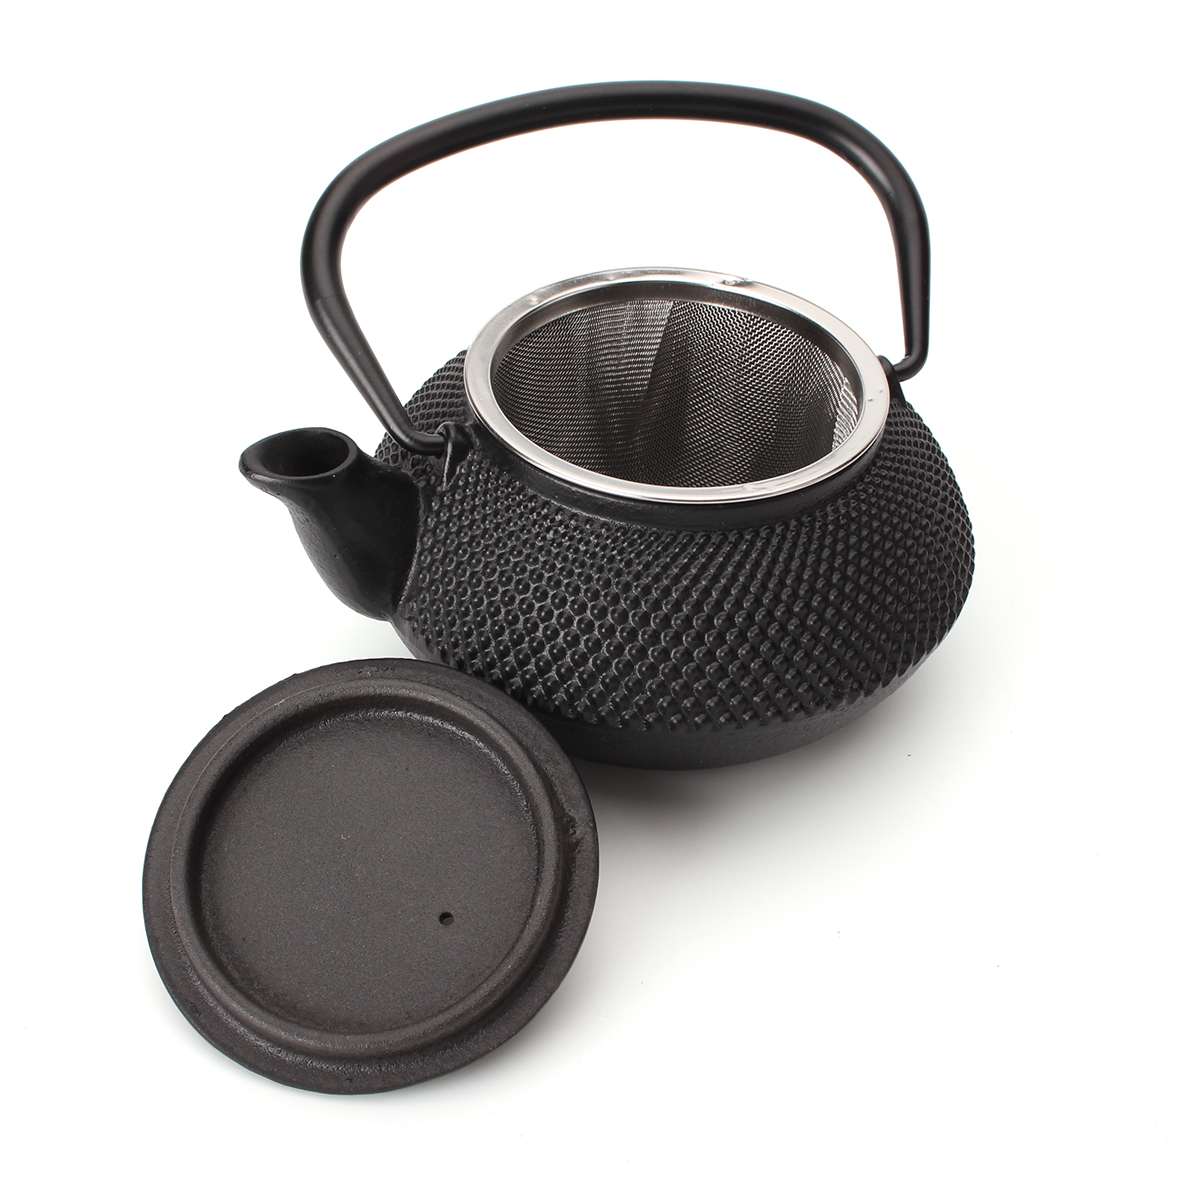 Tetsubin 20-ounce Round Black Cast Iron Teapot with strainer